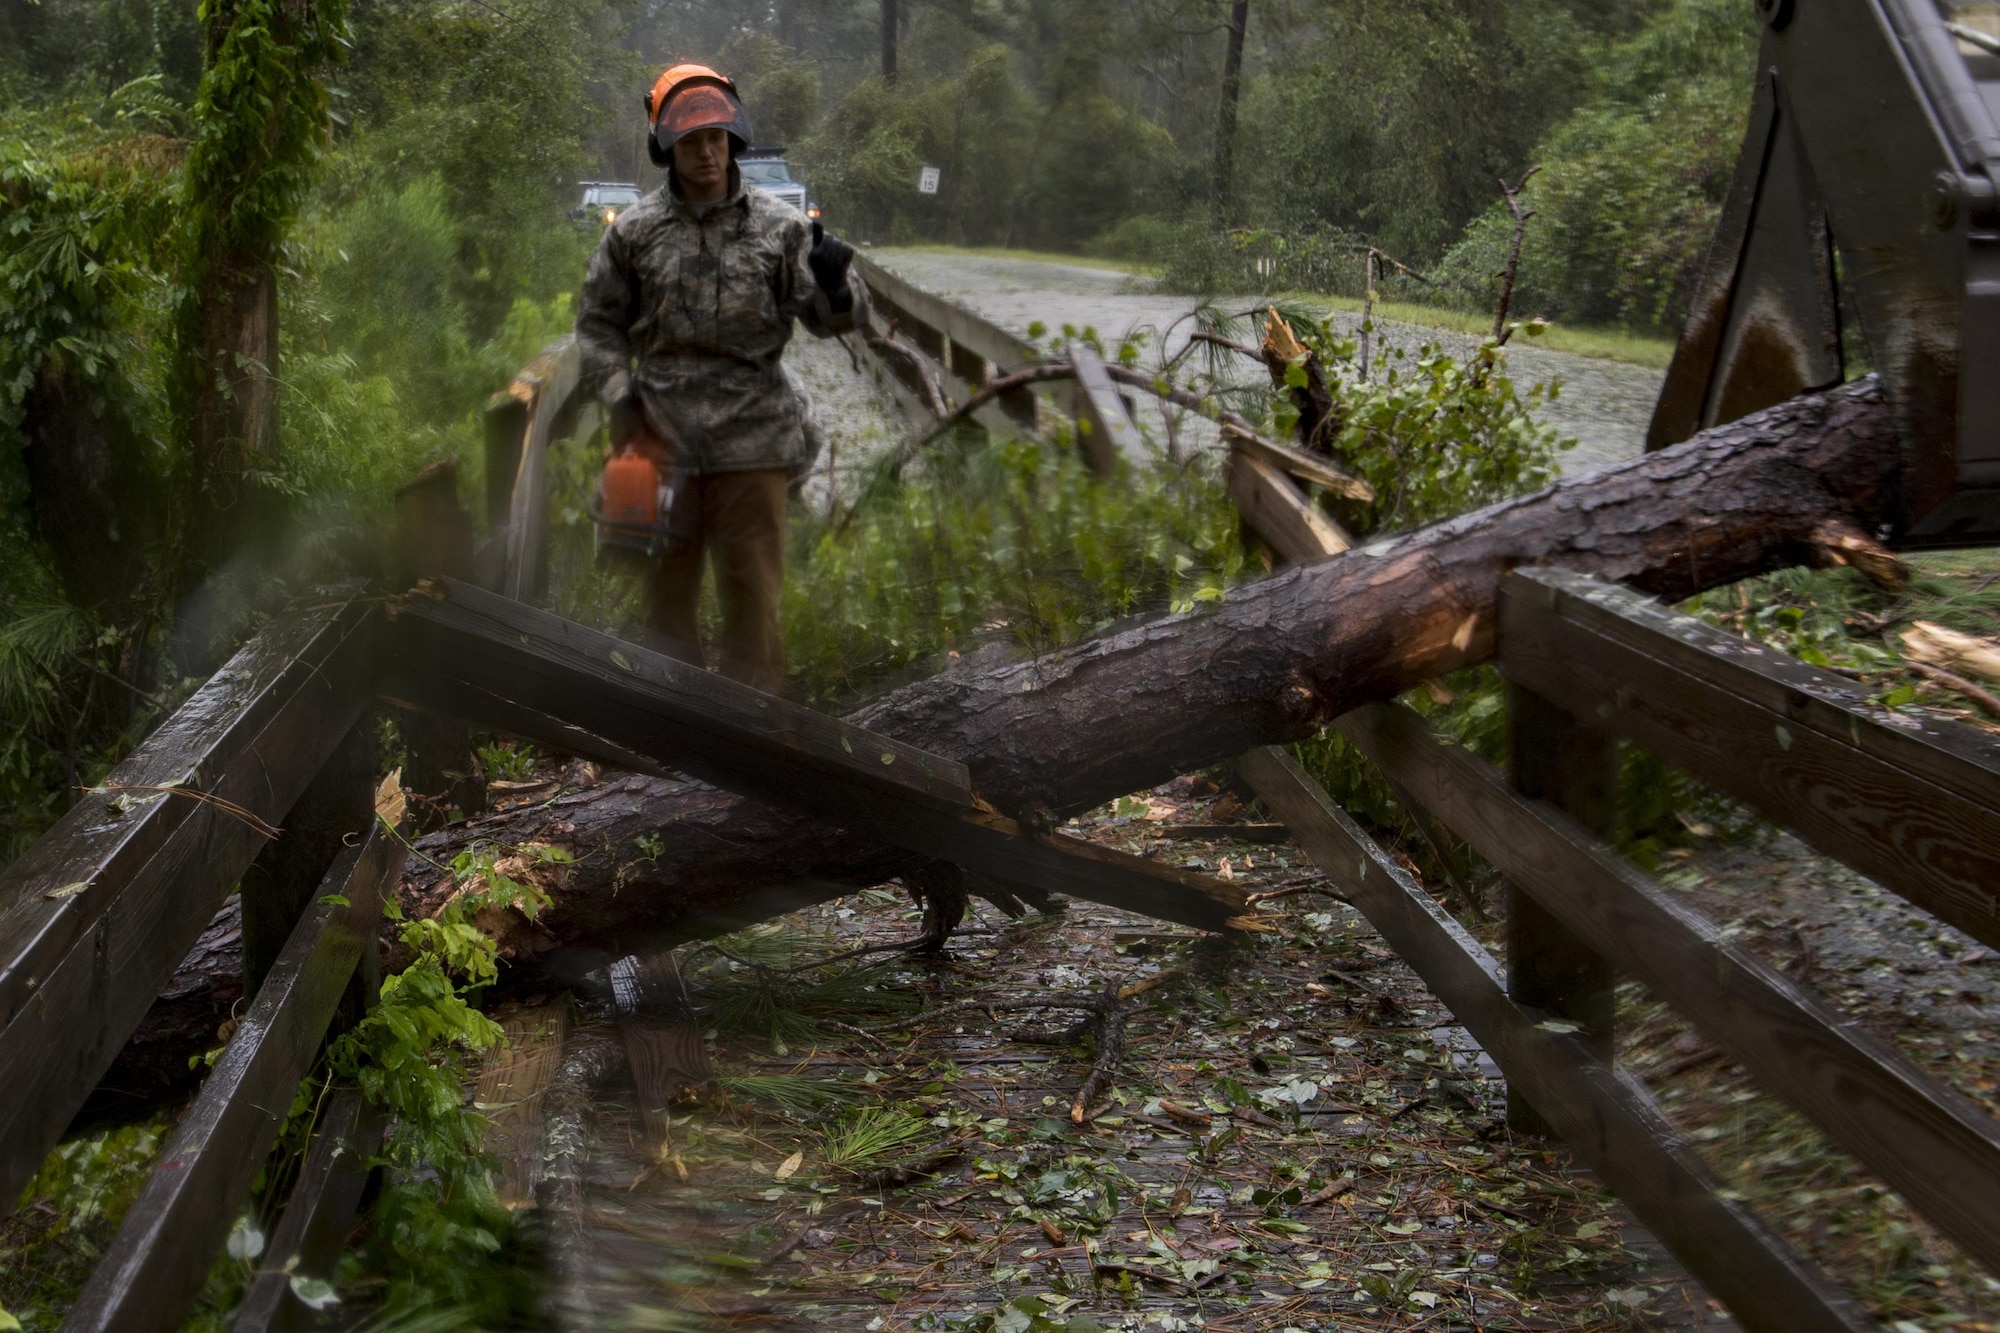 Senior Airman Justin Benito, 23rd Civil Engineer Squadron heavy equipment operator, uses a chainsaw to cut a fallen tree’s trunk, Sept. 11, 2017, at Moody Air Force Base, Ga. Moody’s ride-out team consisted of approximately 80 Airmen who were tasked with immediately responding to mission-inhibiting damage caused by Hurricane Irma. (U.S. Air Force photo by Airman 1st Class Daniel Snider)